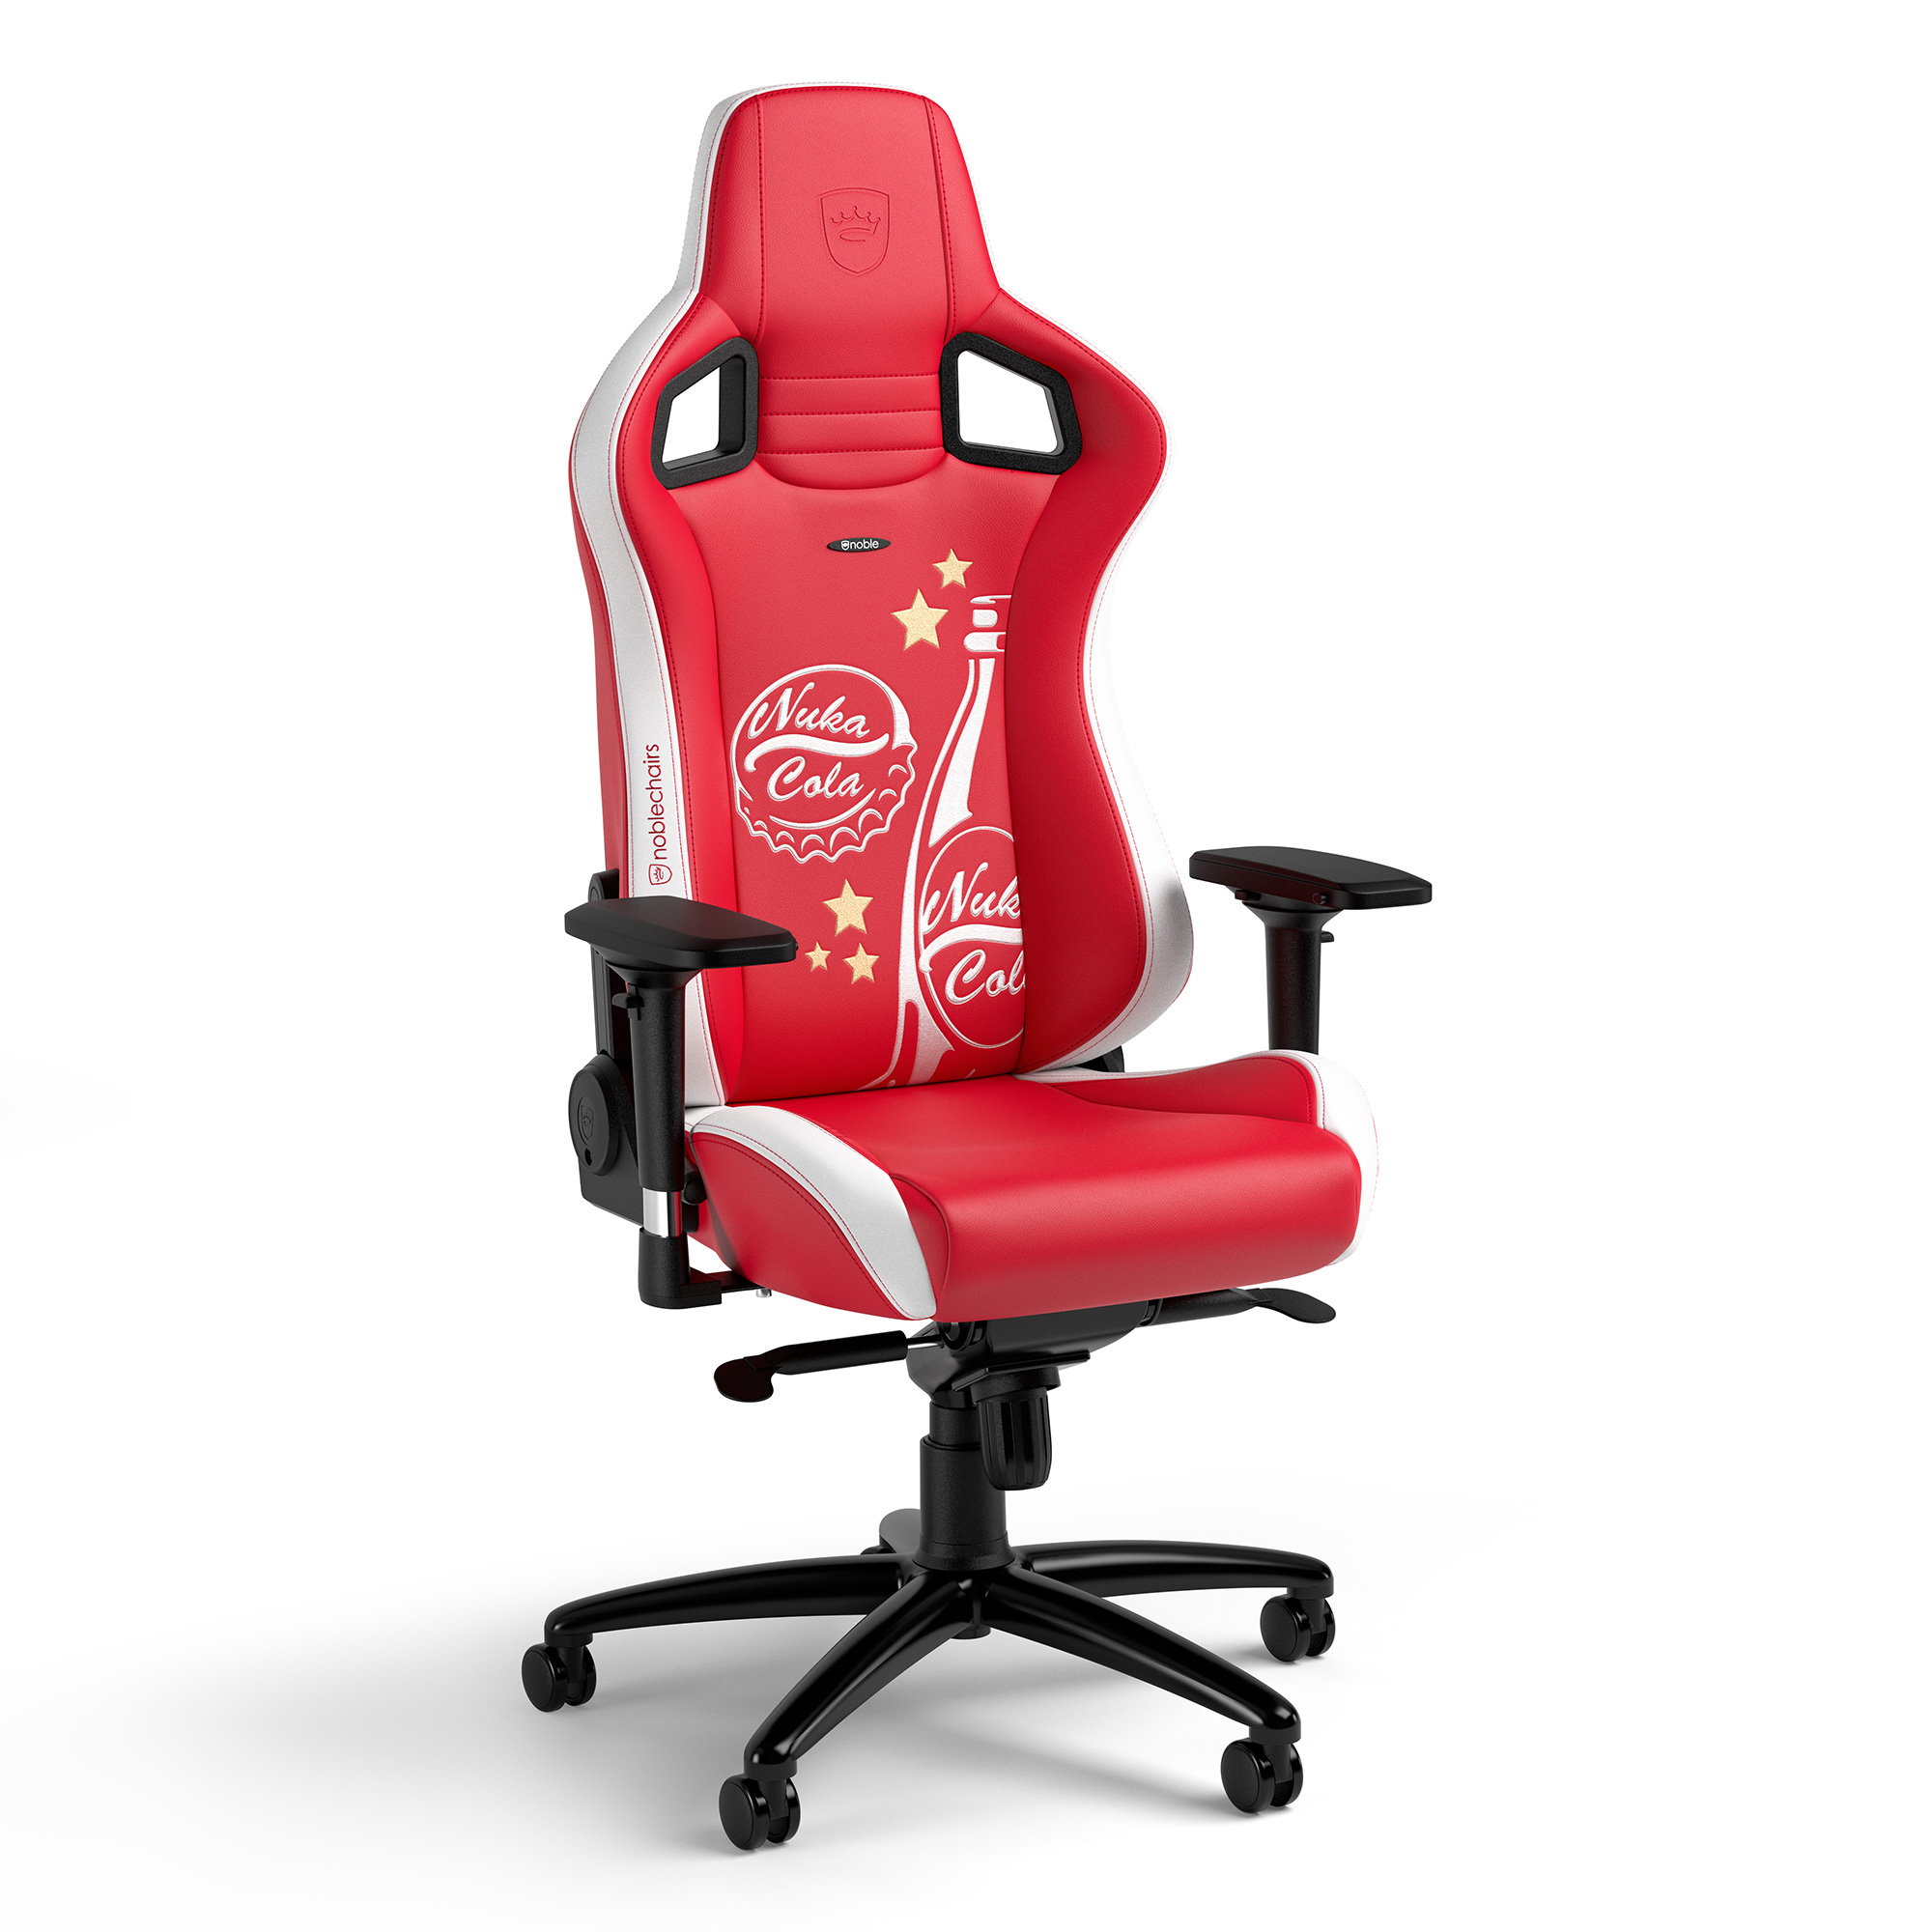 noblechairs - noblechairs EPIC Gaming Chair Fallout Nuka-Cola Edition